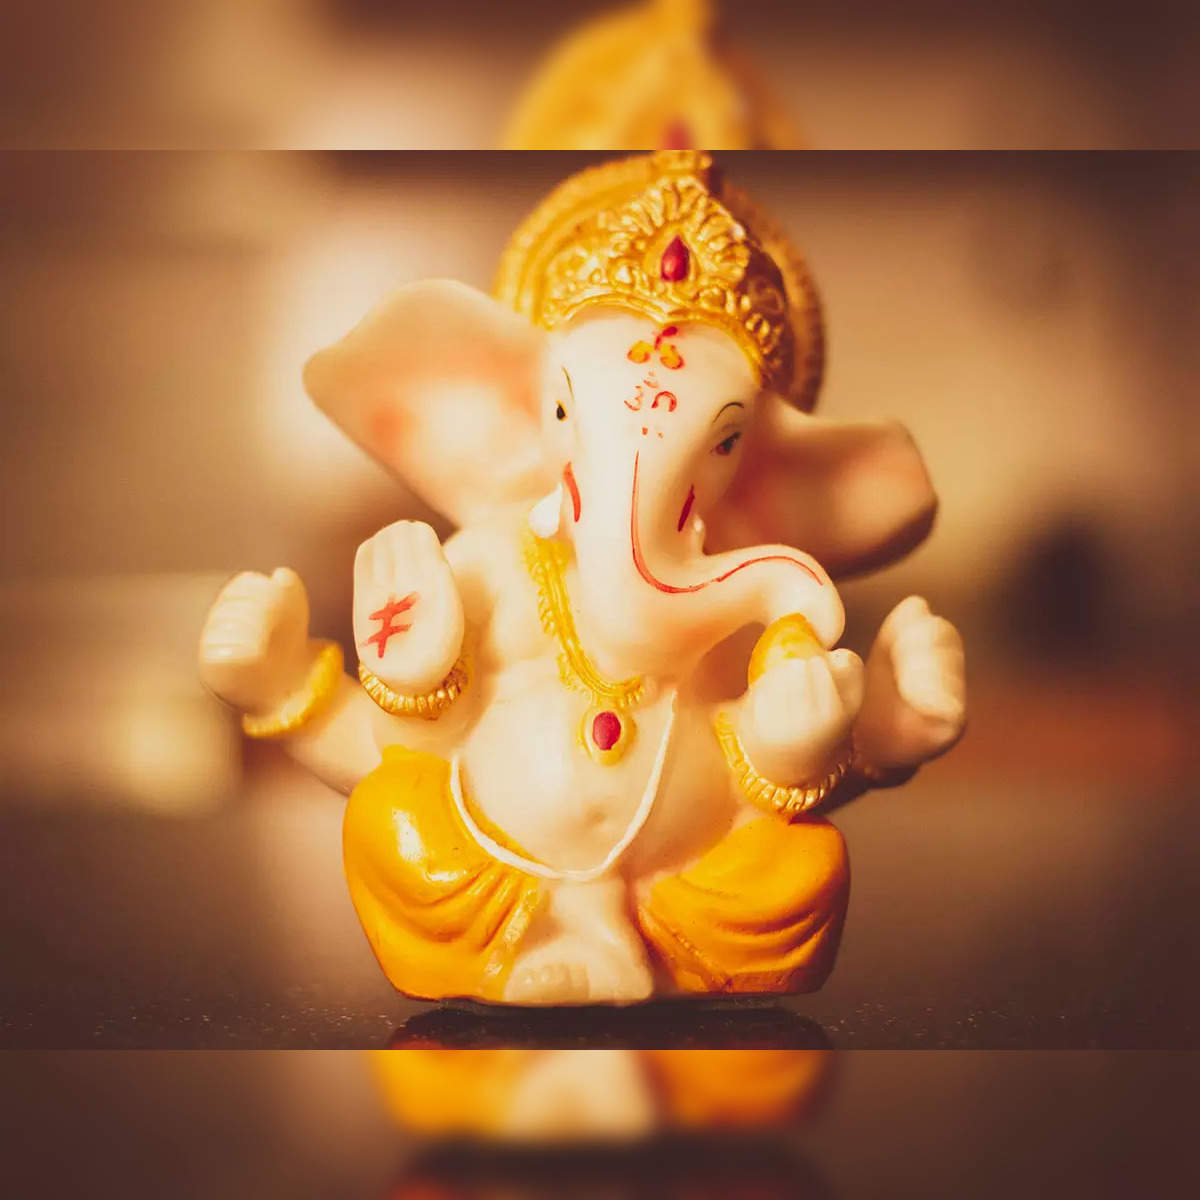 Ganesh Chaturthi 2022: Know the significance and celebrate by sending these  WhatsApp messages - The Economic Times